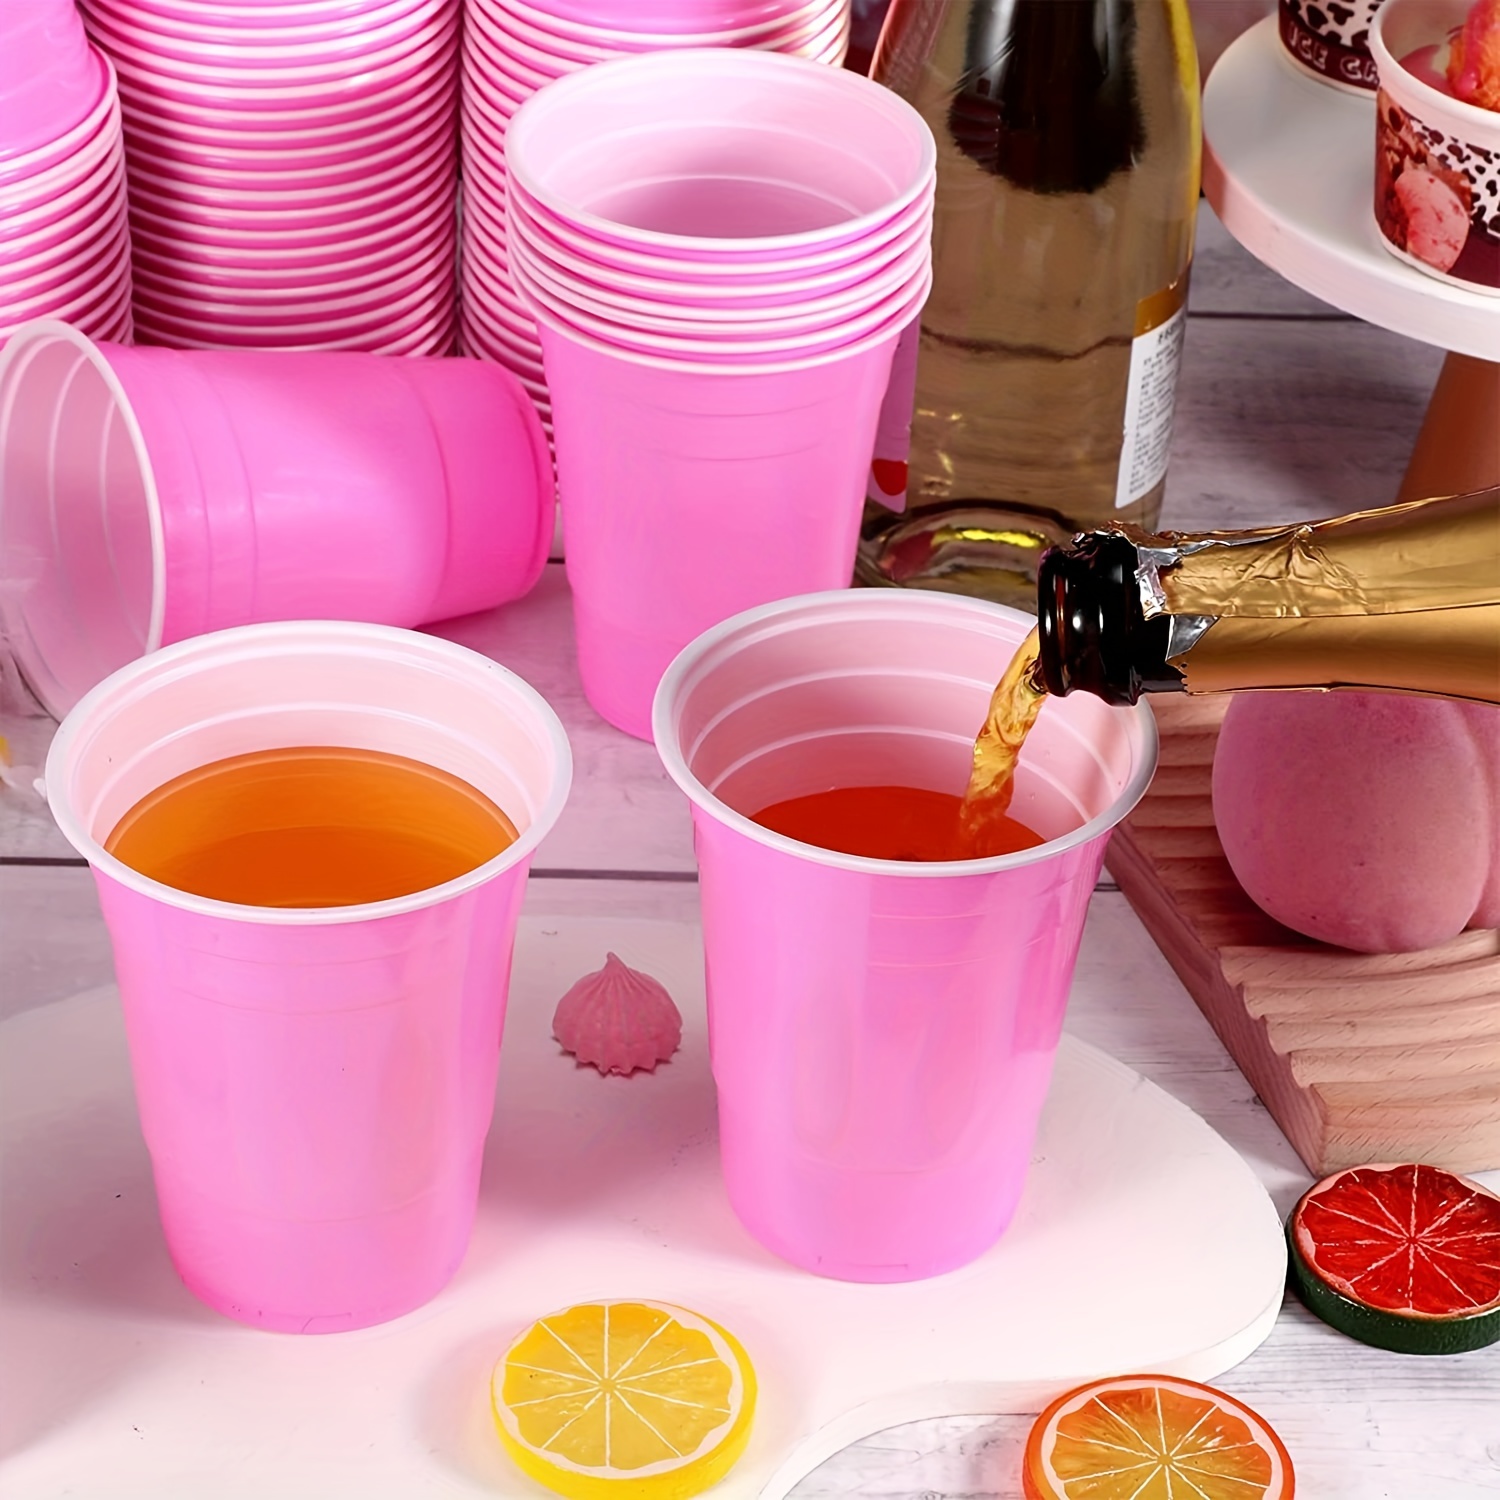 Purple American Beer Pong Solo Party Cups 16oz Party Cups Purple